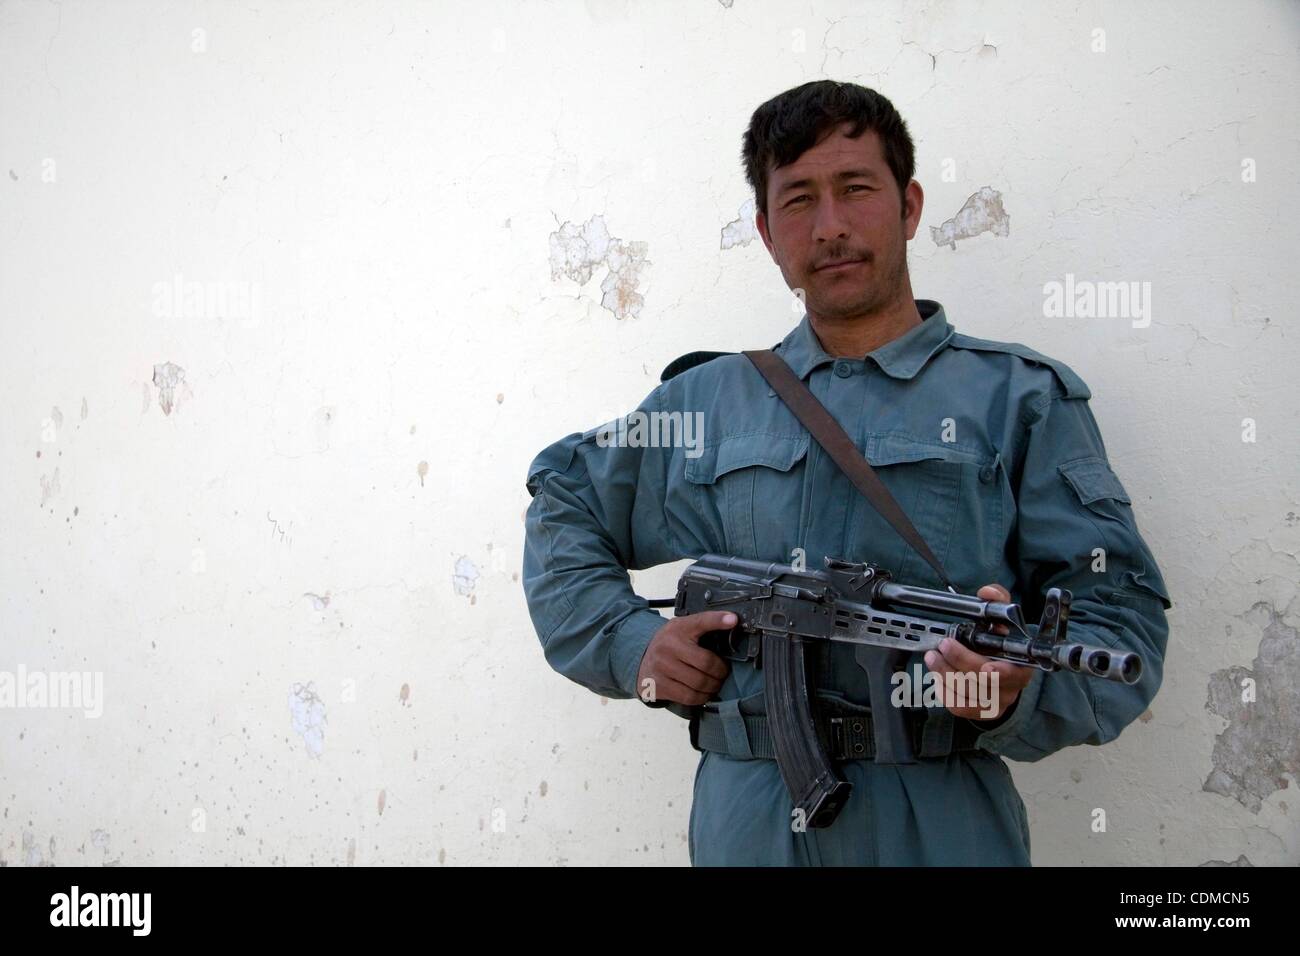 Apr 05, 2011 - Kandahar, Afghanistan - A policeman with the Afghan National Police from the northern province of Kunduz outside the Dand district Center. While the local police force starts to get recruits fom the area, this policeman only speaks Dari and cannot communicate with the local population Stock Photo